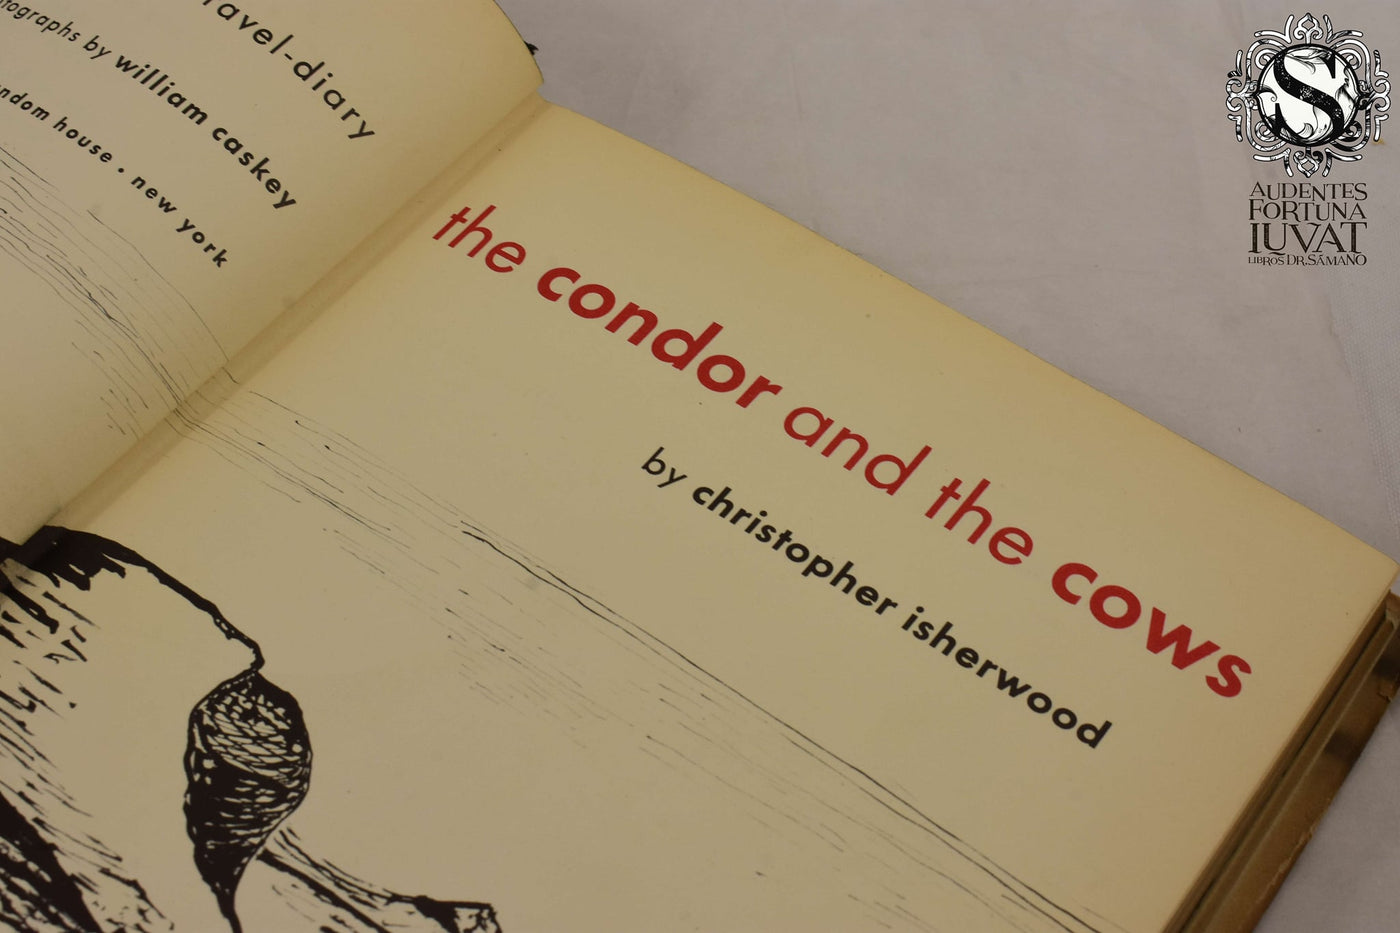 THE CONDOR AND THE COWS - Christopher Isherwood